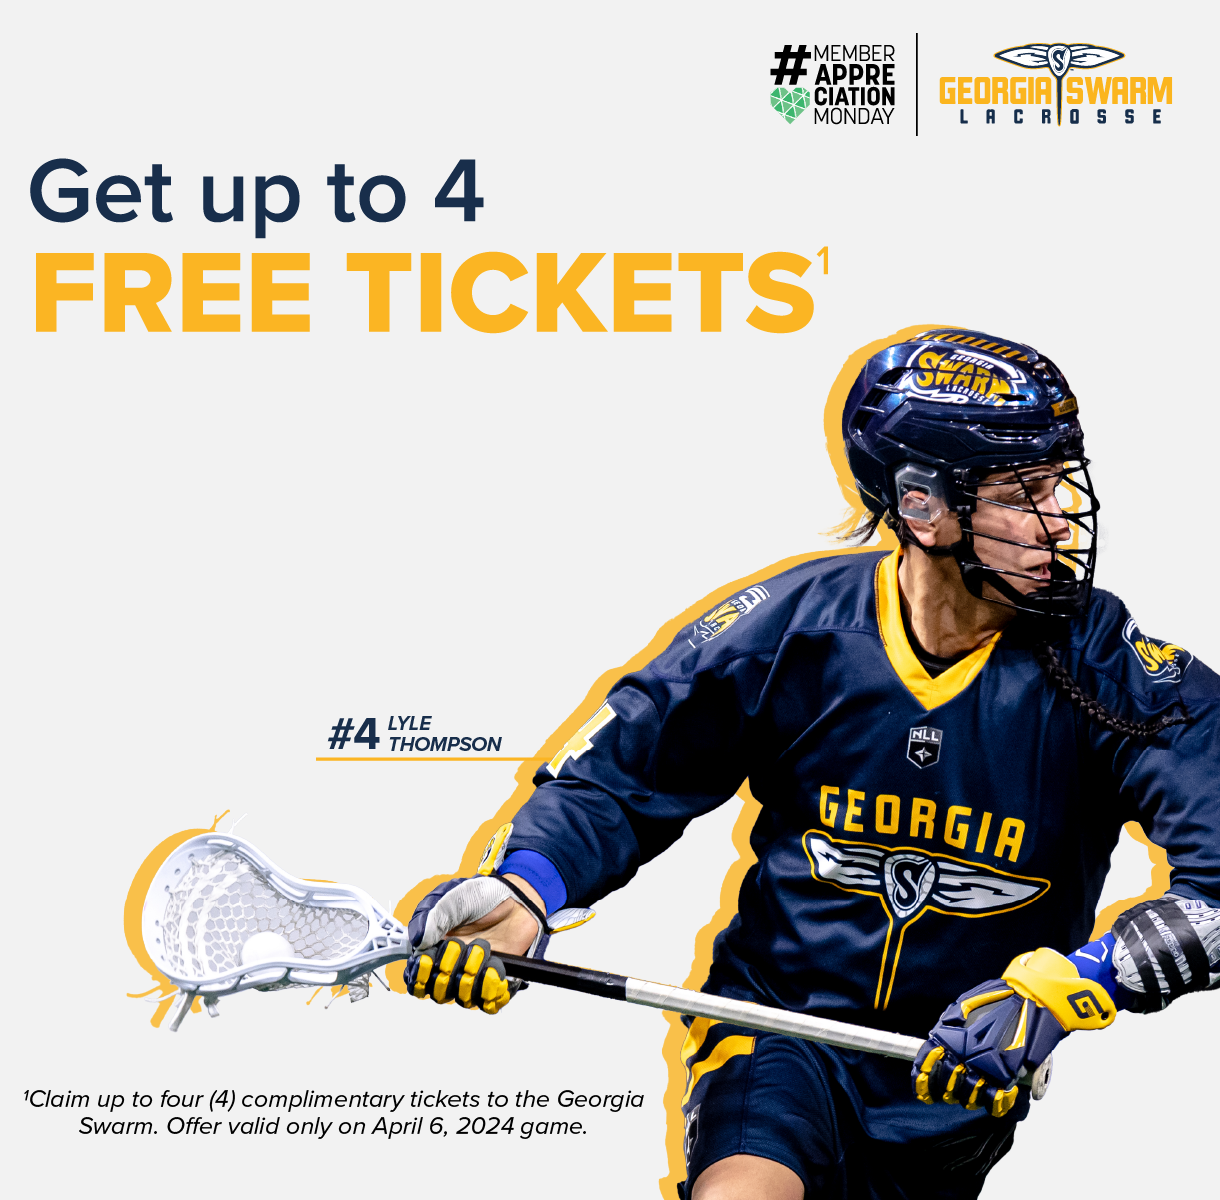 Get up to 4 free tickets to the Georgia Swarm